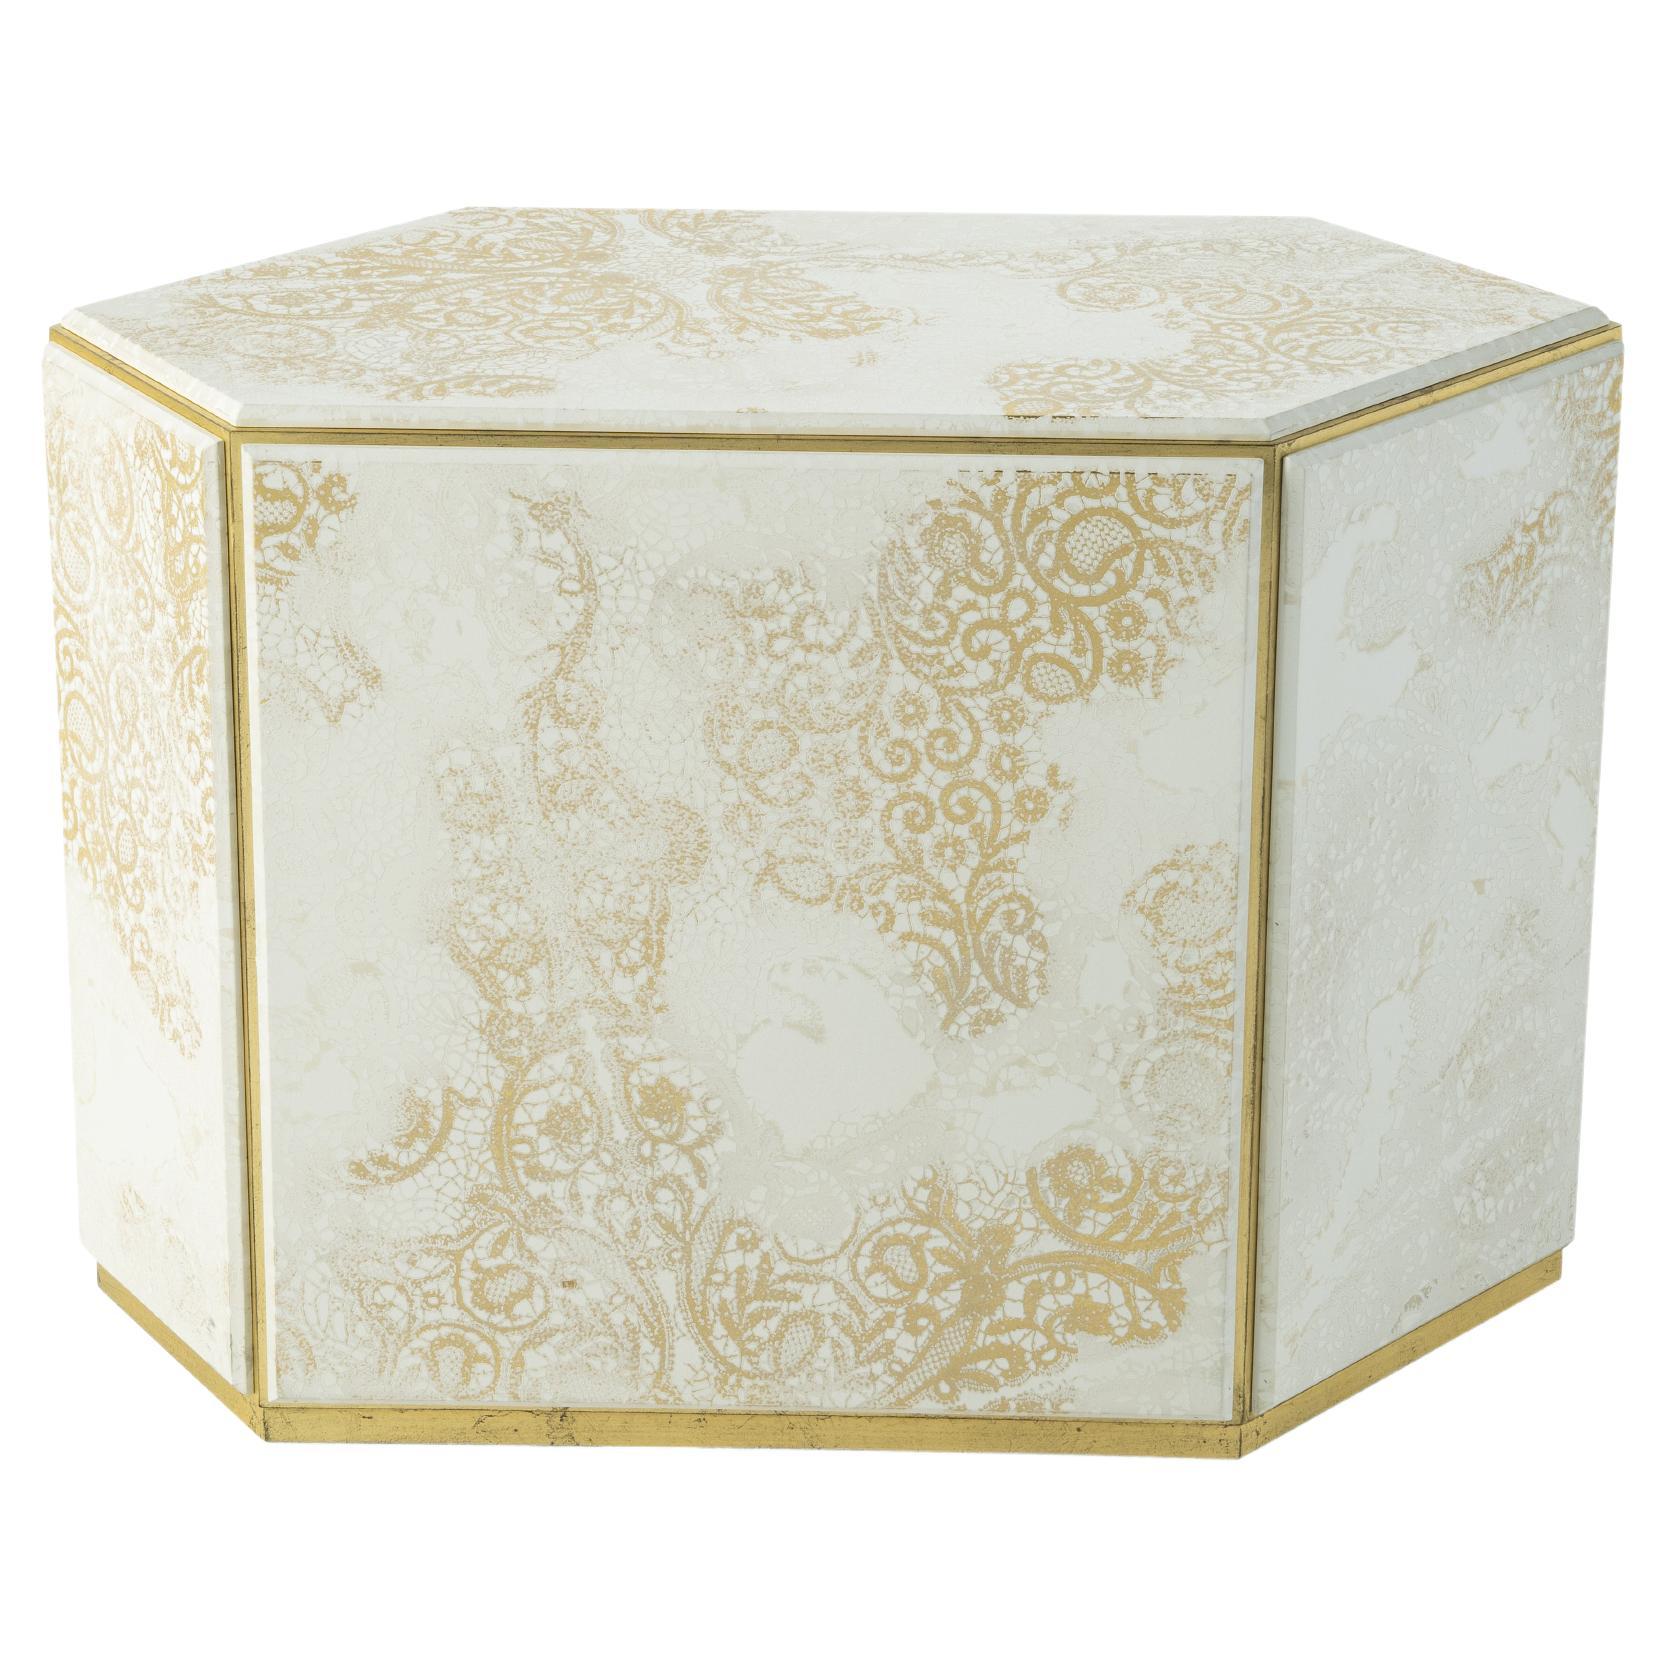 21st Century Très Jolie Low Table with Gold Leaf Laser Engraved Lace  For Sale